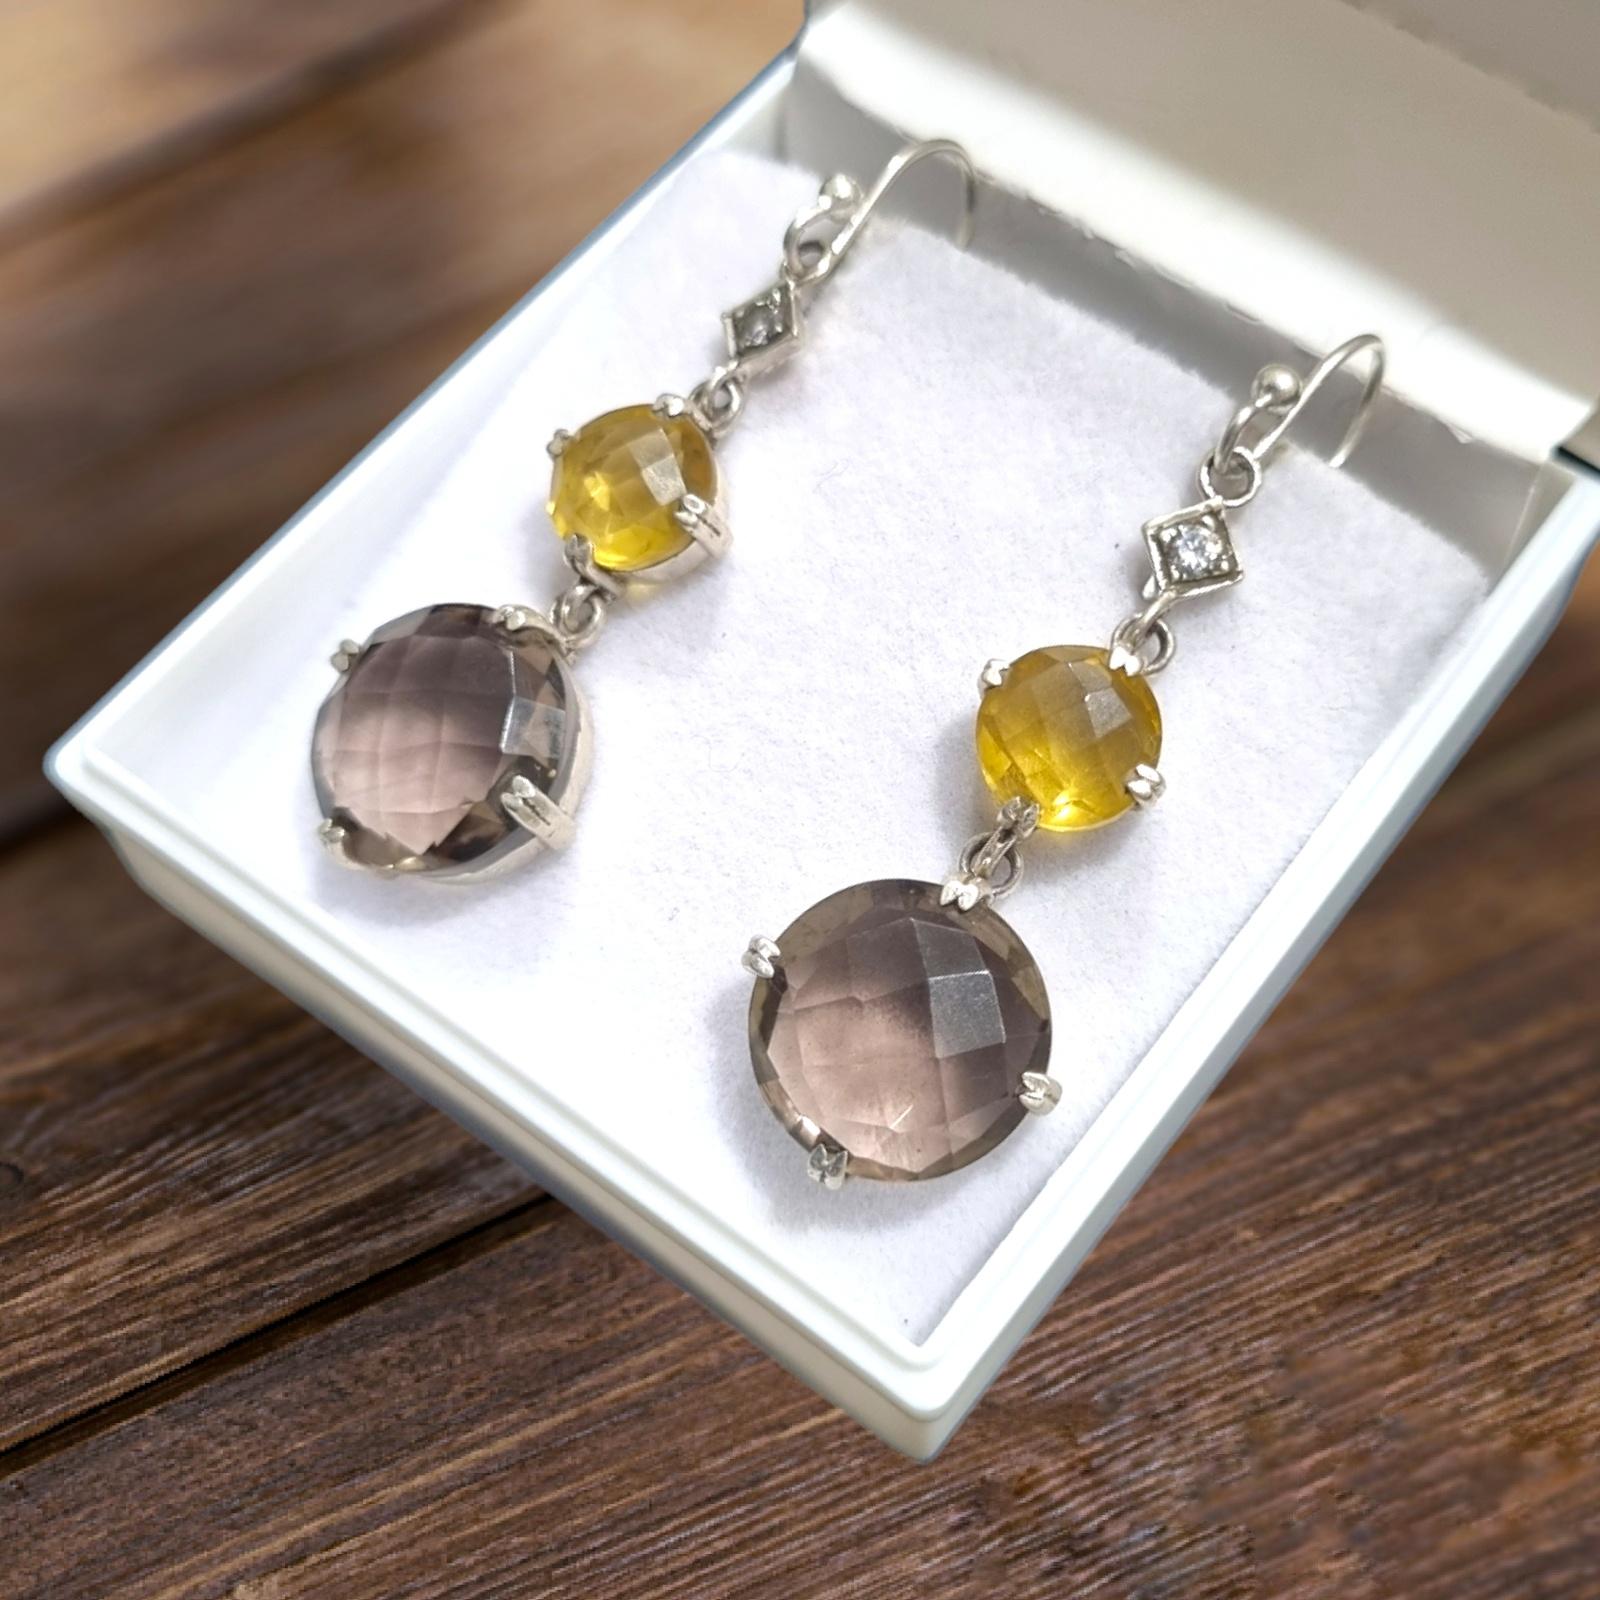 
Description:

Enhance your everyday elegance with these exquisite sterling silver dangle earrings adorned with mesmerizing lemon quartz and smokey quartz gemstones. Handcrafted with precision and passion, these earrings exude sophistication and